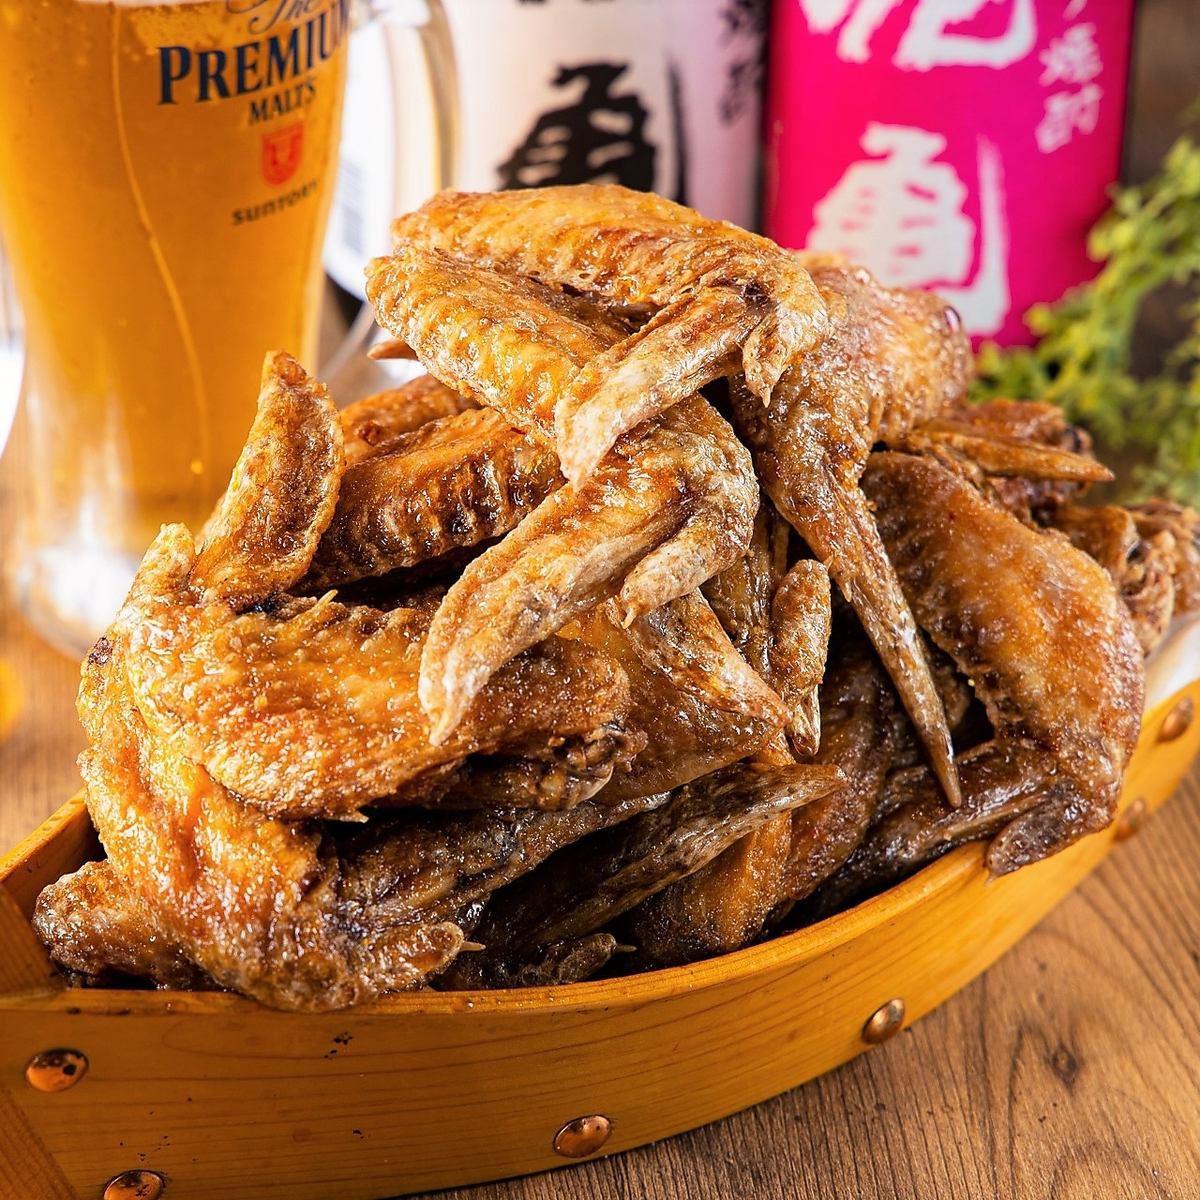 All-you-can-eat "legendary chicken wings" for 999 yen! The all-you-can-eat hot pot is also popular!